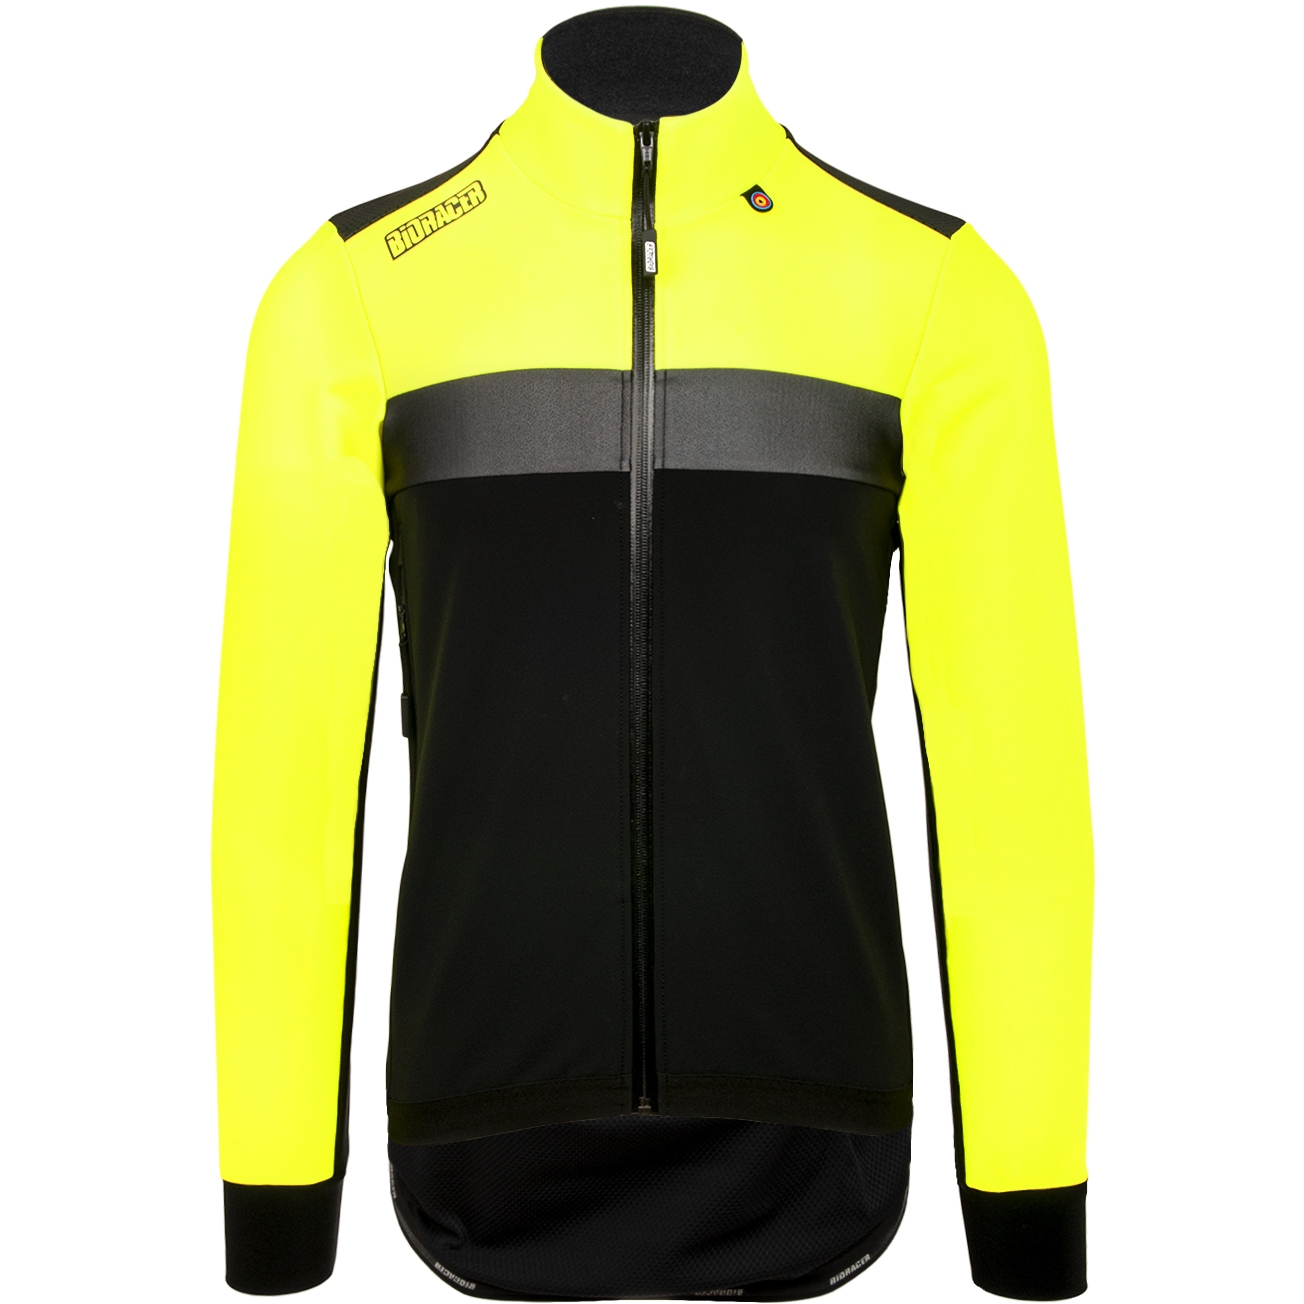 Image of Bioracer Spitfire Tempest Protect Winter Jacket Subli Fluo - fluo yellow